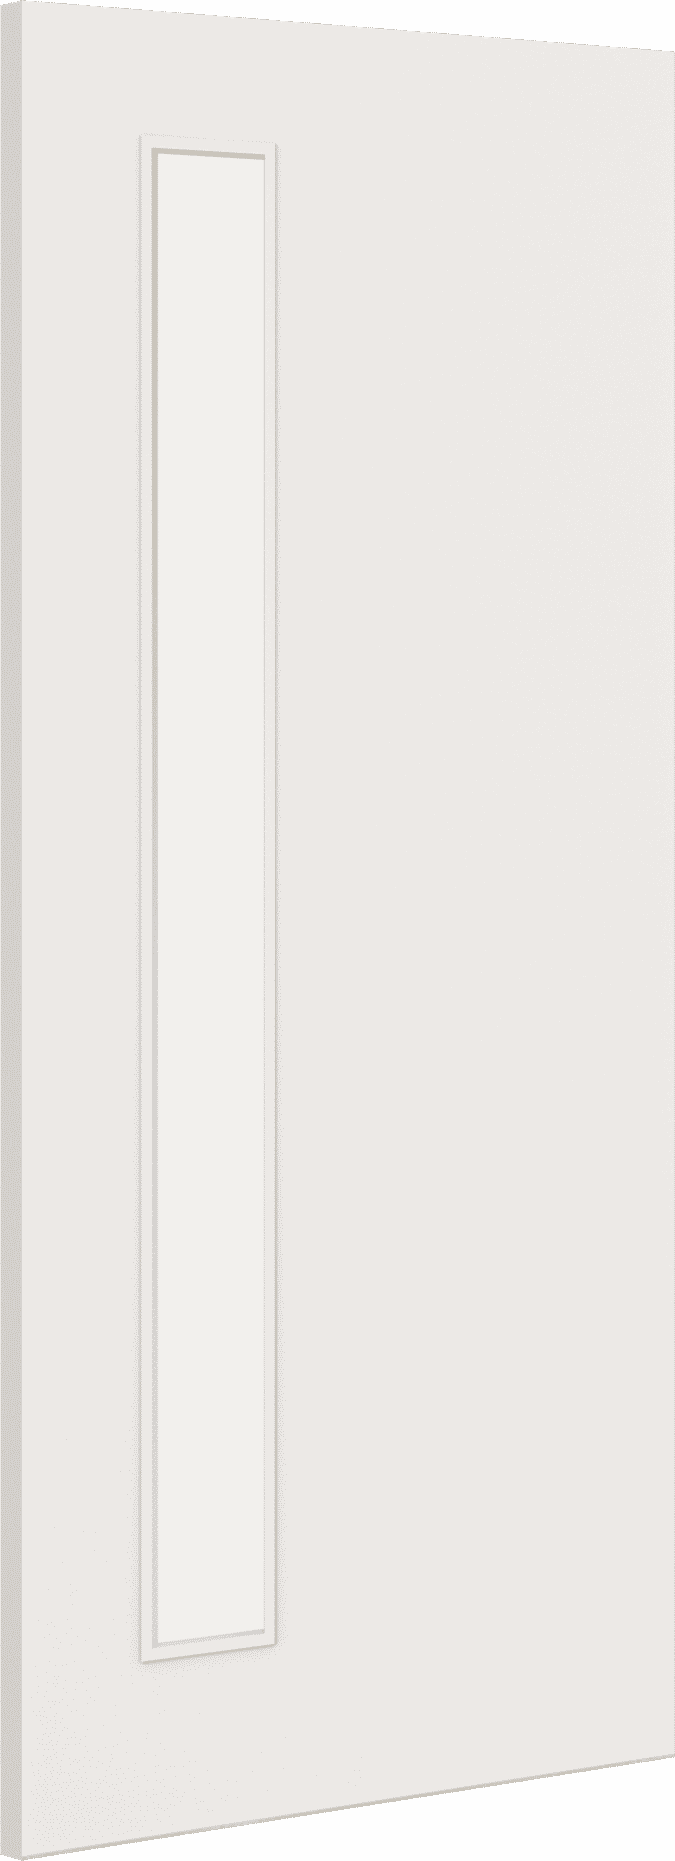 1981mm x 914mm x 44mm (36") Architectural Paint Grade White 06 Clear Glazed Fire Door Blank